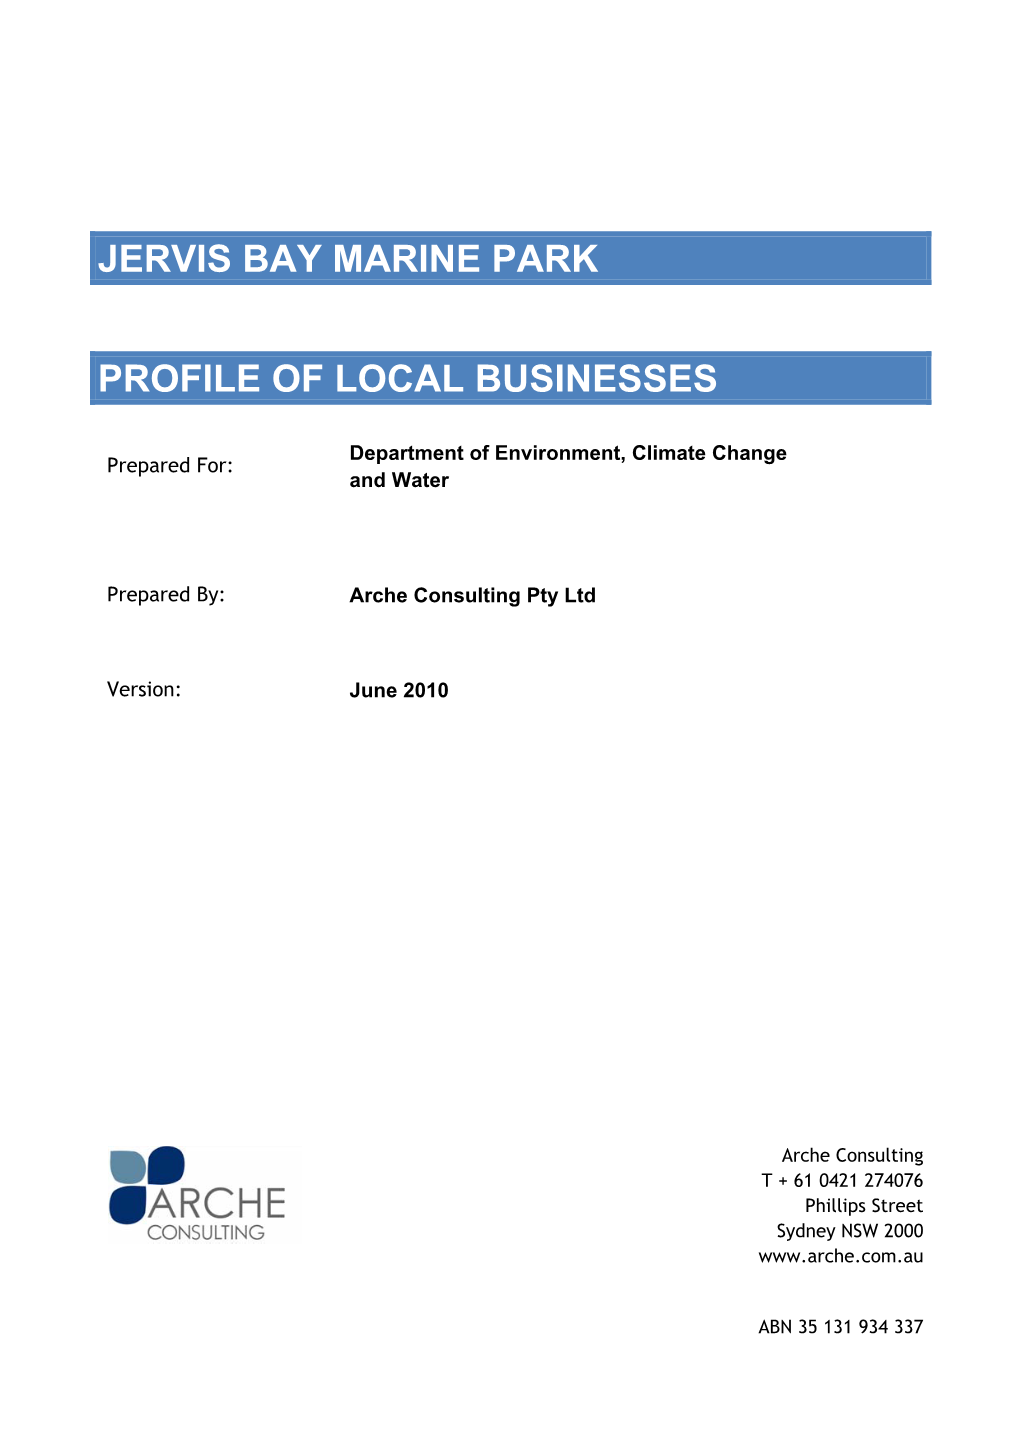 Jervis Bay Marine Park Profile of Local Businesses